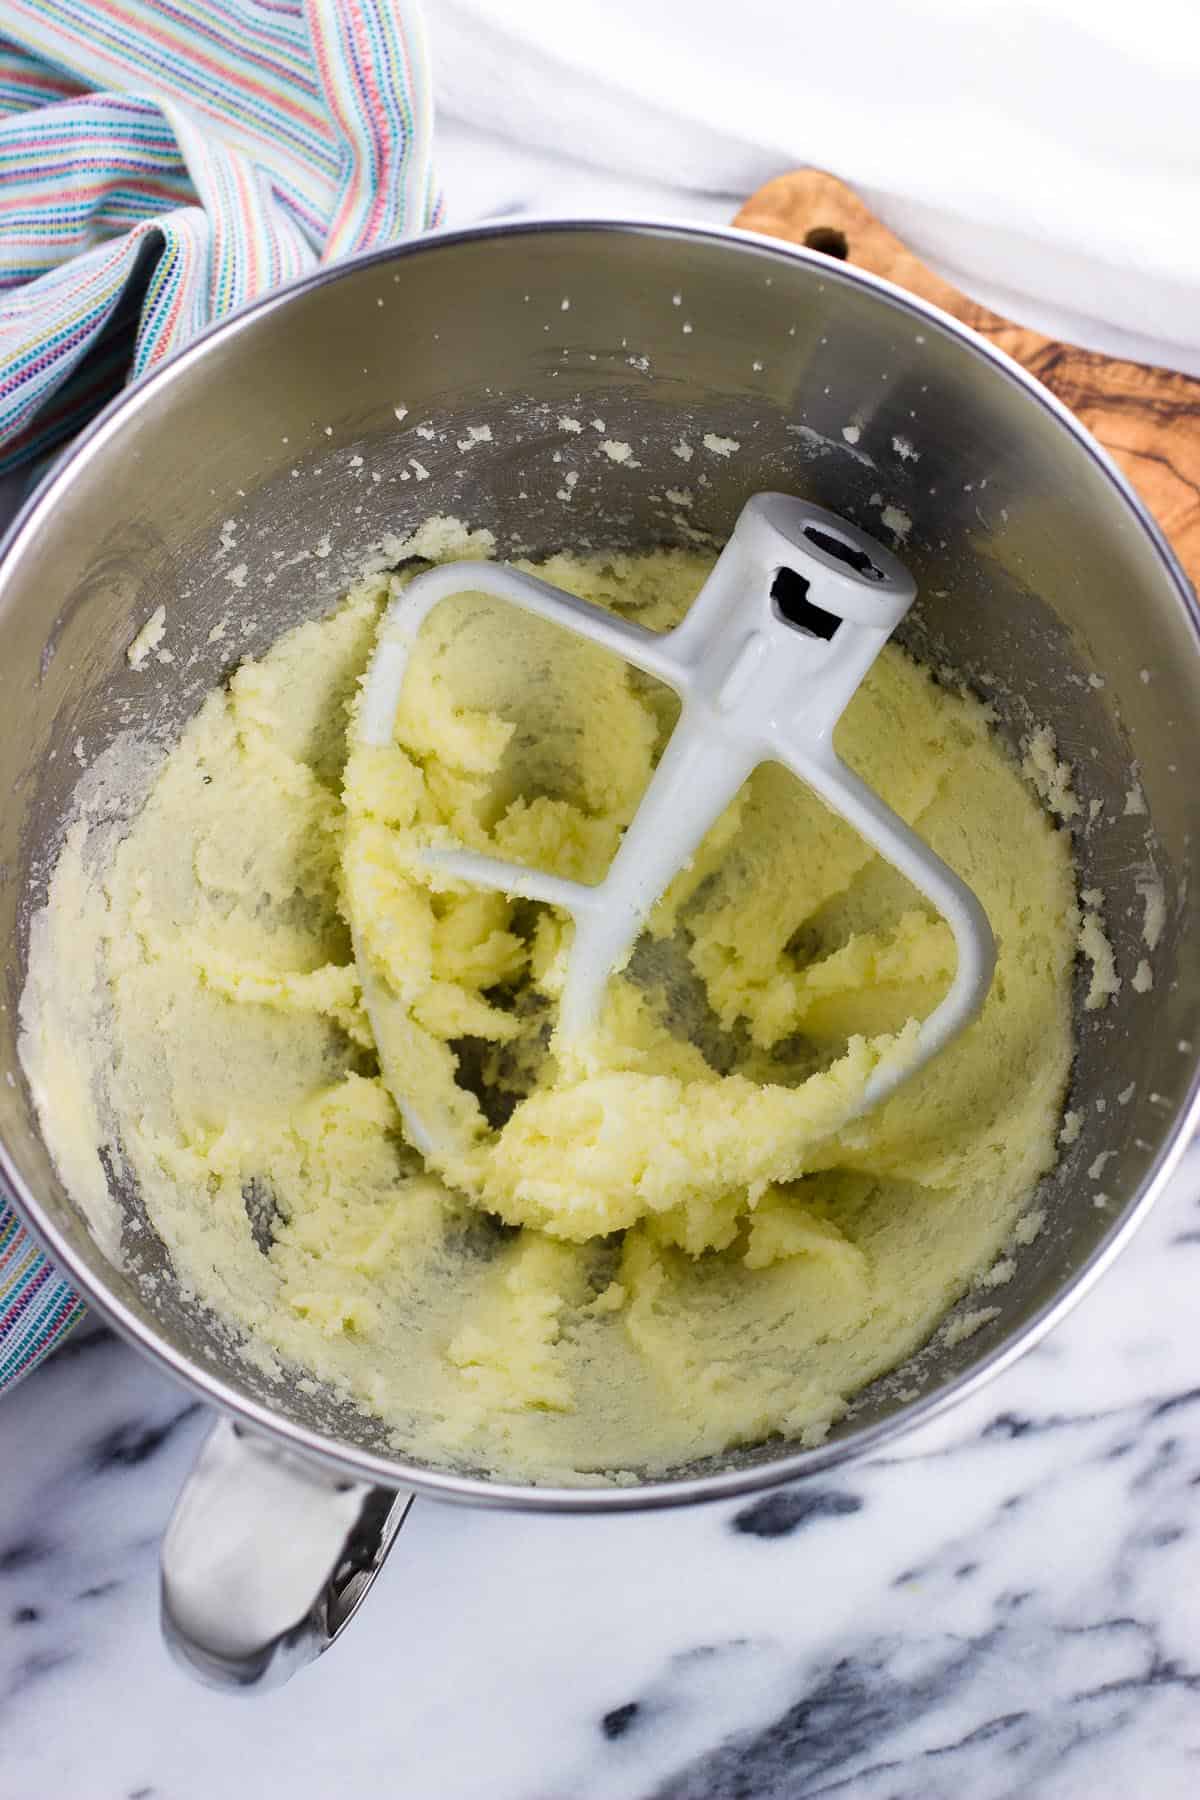 Creamed butter and sugar in a metal mixing bowl.